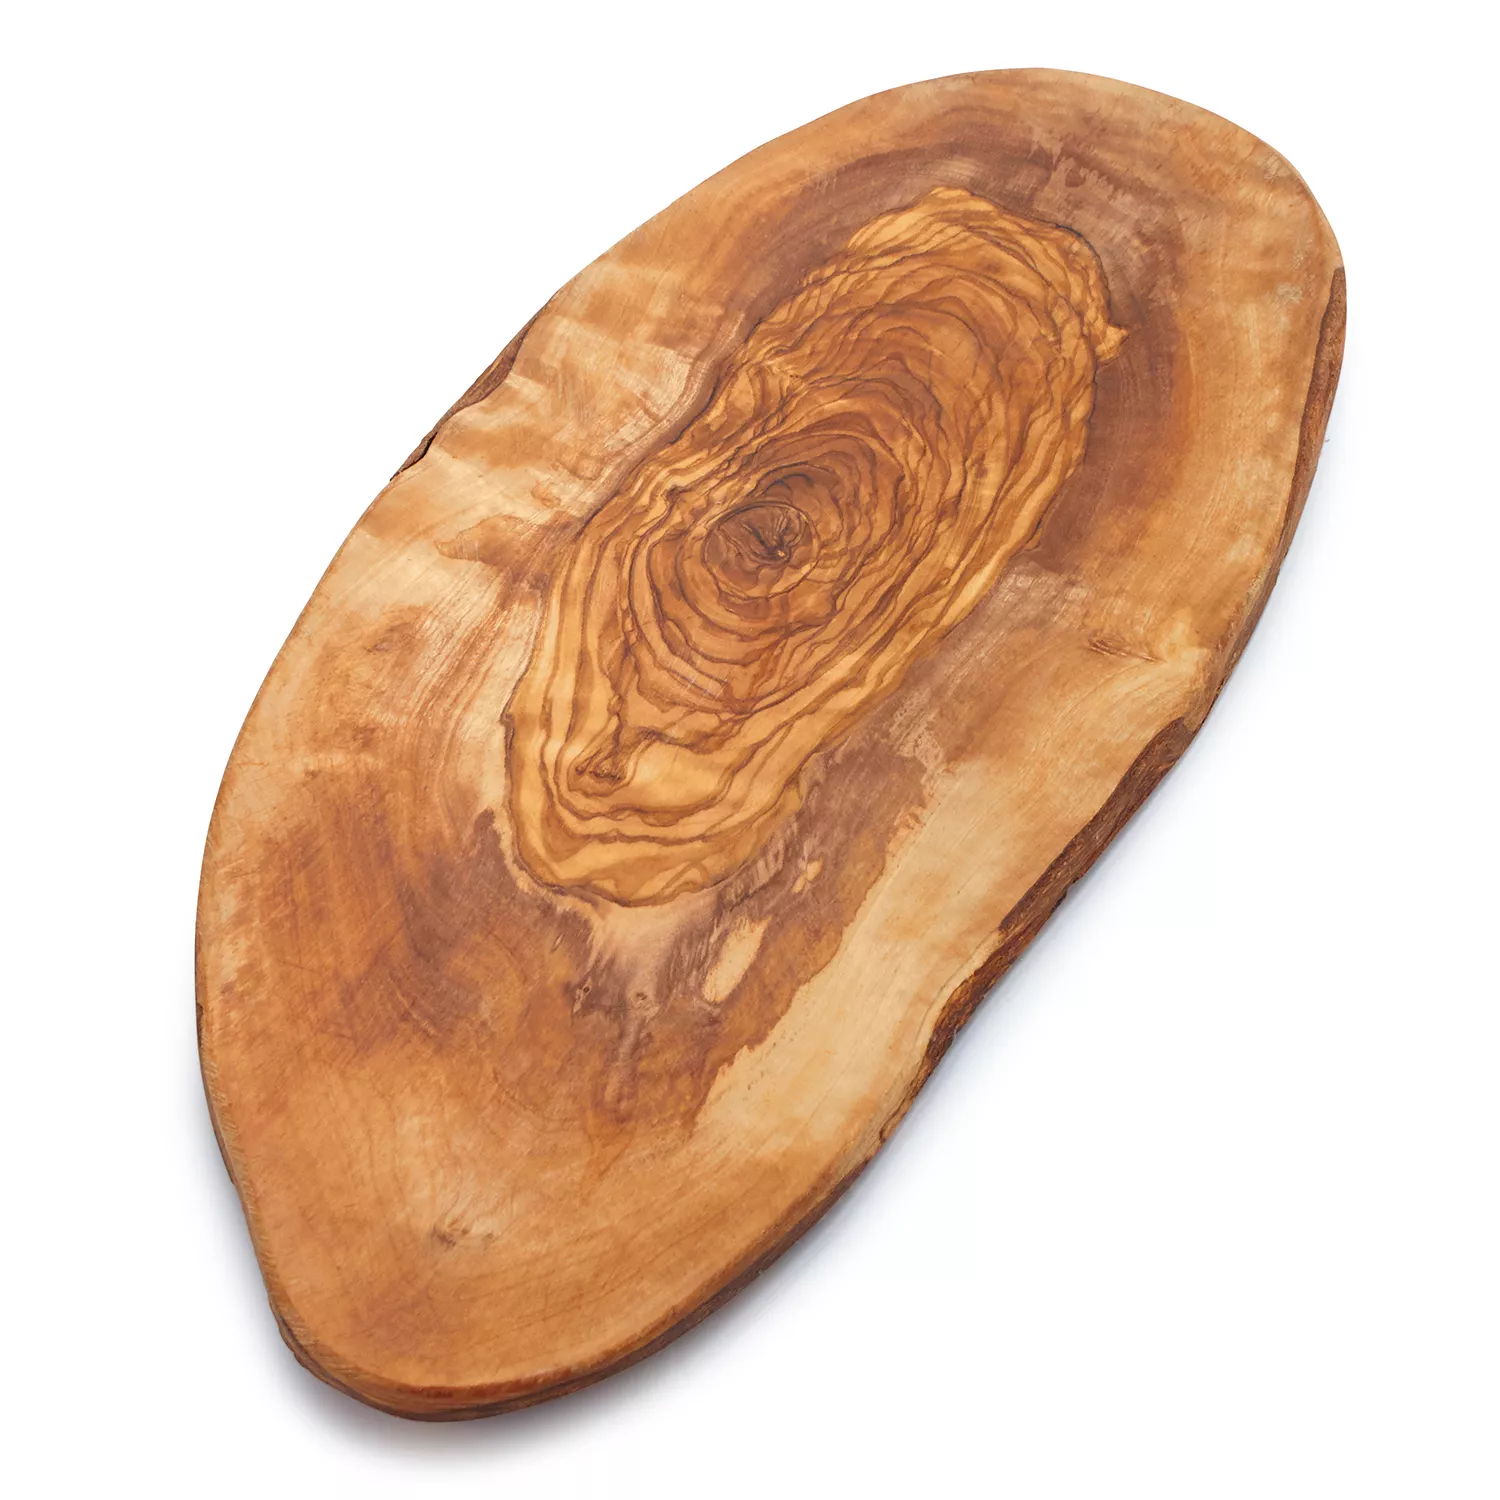 Olive Wood and Stainless Steel Desing Egg Holder